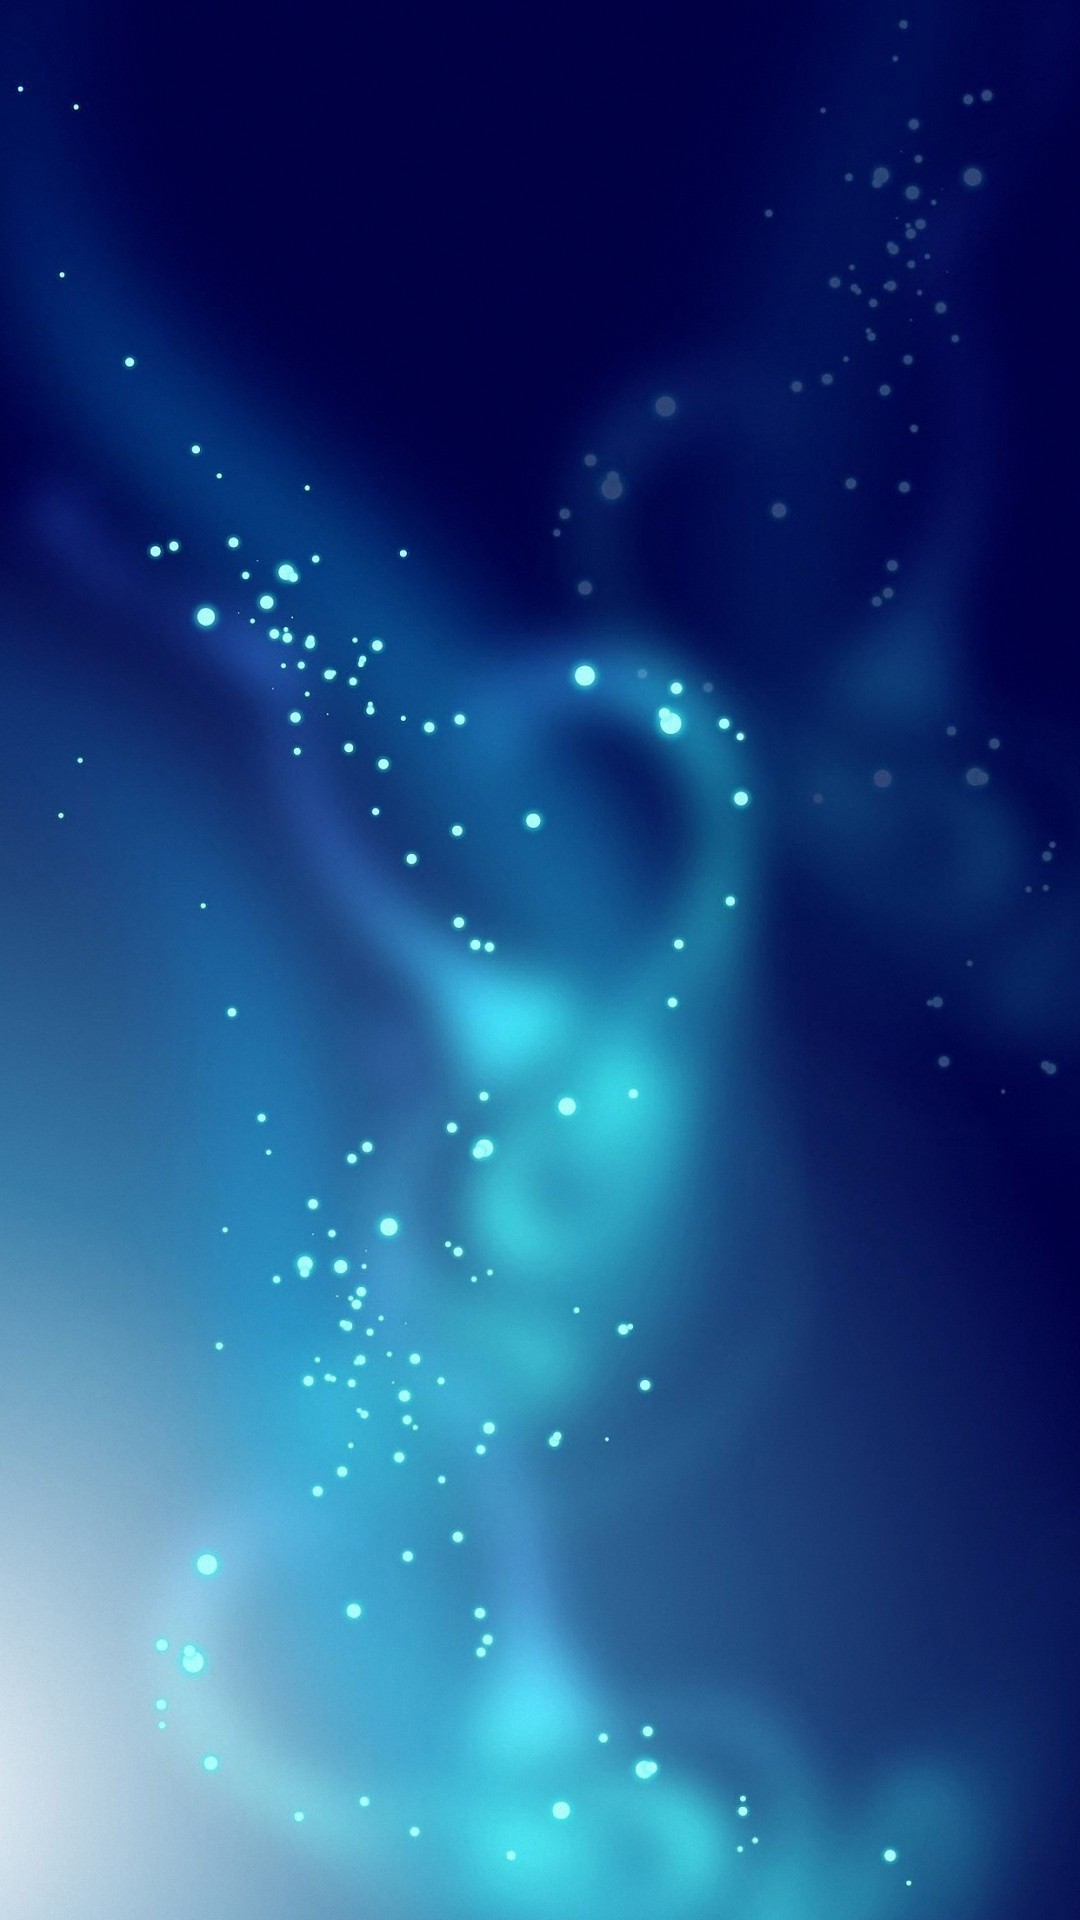 Abstract Blue Sparkling Iphone Wallpapers Iphone12 スマホ壁紙 待受画像ギャラリー